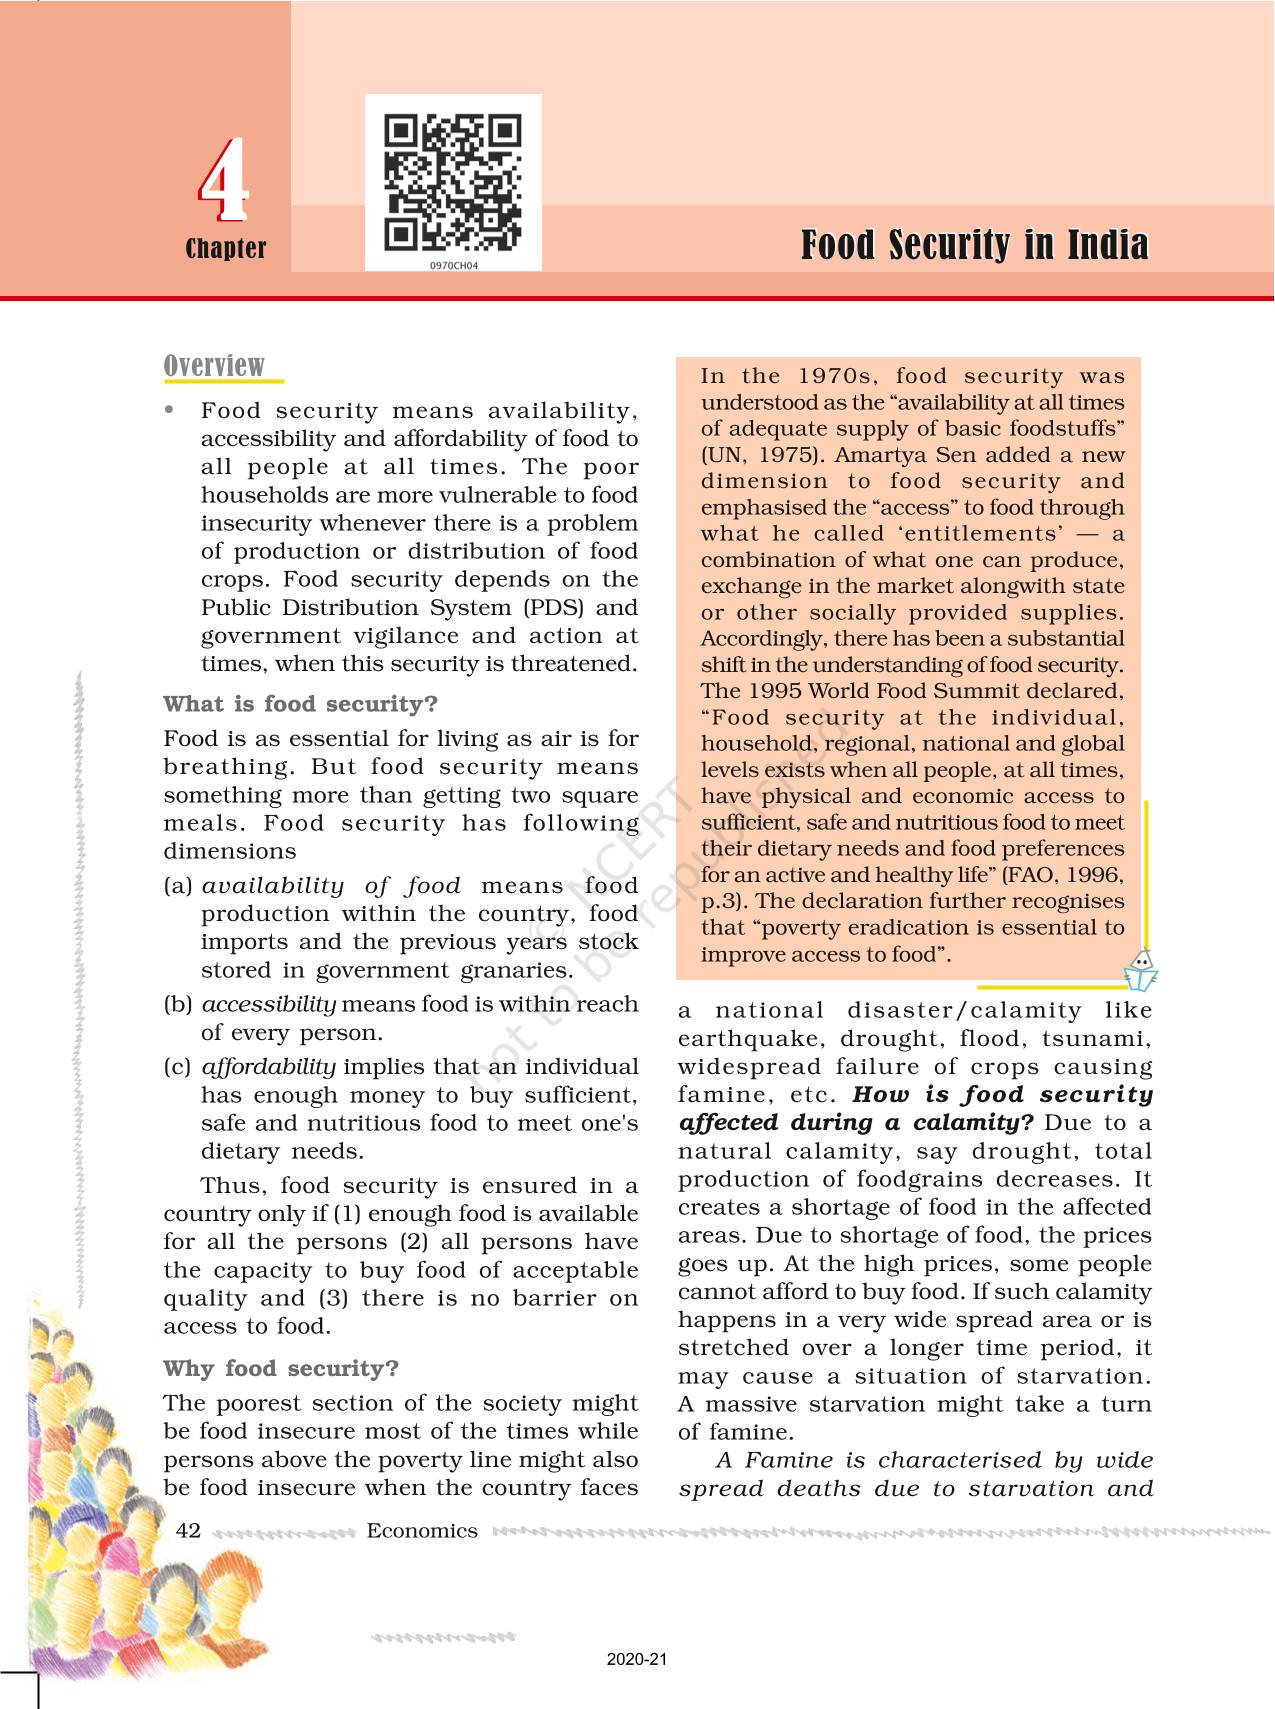 make assignment on food security in india